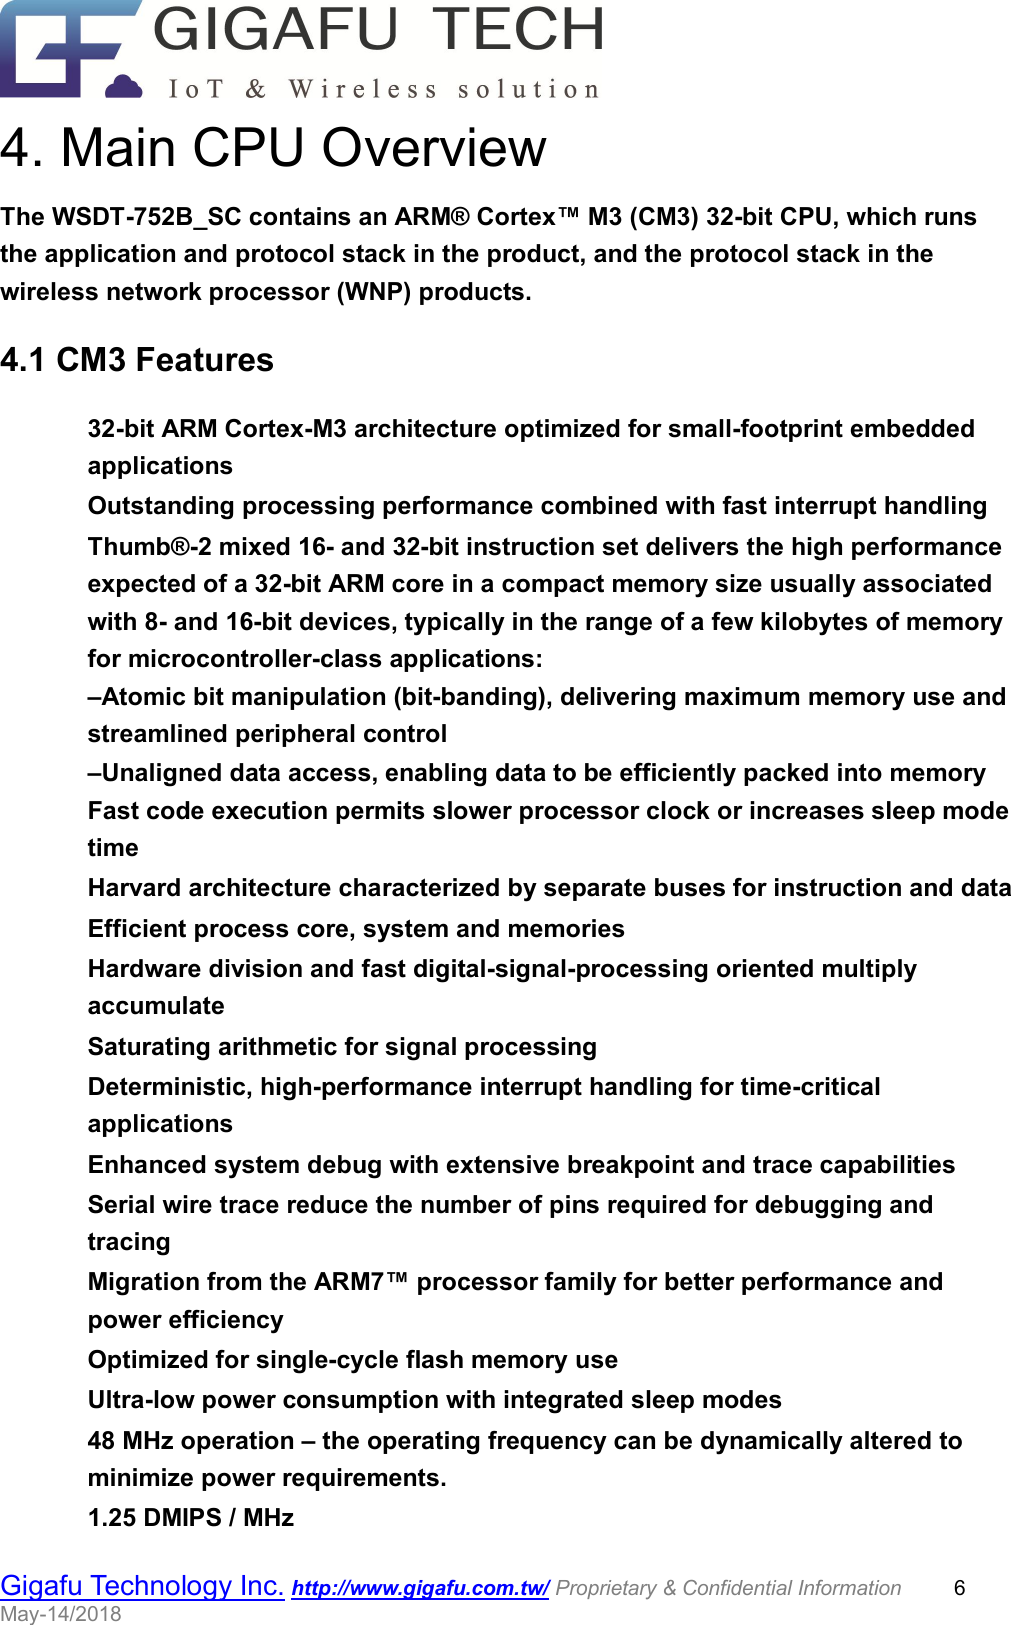                                                  Gigafu Technology Inc. http://www.gigafu.com.tw/ Proprietary &amp; Confidential Information          6 May-14/2018   4. Main CPU Overview The WSDT-752B_SC contains an ARM® Cortex™ M3 (CM3) 32-bit CPU, which runs the application and protocol stack in the product, and the protocol stack in the wireless network processor (WNP) products.   4.1 CM3 Features    32-bit ARM Cortex-M3 architecture optimized for small-footprint embedded applications    Outstanding processing performance combined with fast interrupt handling    Thumb®-2 mixed 16- and 32-bit instruction set delivers the high performance expected of a 32-bit ARM core in a compact memory size usually associated with 8- and 16-bit devices, typically in the range of a few kilobytes of memory for microcontroller-class applications:    –Atomic bit manipulation (bit-banding), delivering maximum memory use and streamlined peripheral control    –Unaligned data access, enabling data to be efficiently packed into memory    Fast code execution permits slower processor clock or increases sleep mode time    Harvard architecture characterized by separate buses for instruction and data    Efficient process core, system and memories    Hardware division and fast digital-signal-processing oriented multiply accumulate    Saturating arithmetic for signal processing    Deterministic, high-performance interrupt handling for time-critical applications    Enhanced system debug with extensive breakpoint and trace capabilities    Serial wire trace reduce the number of pins required for debugging and tracing    Migration from the ARM7™ processor family for better performance and power efficiency    Optimized for single-cycle flash memory use    Ultra-low power consumption with integrated sleep modes    48 MHz operation – the operating frequency can be dynamically altered to minimize power requirements.    1.25 DMIPS / MHz   